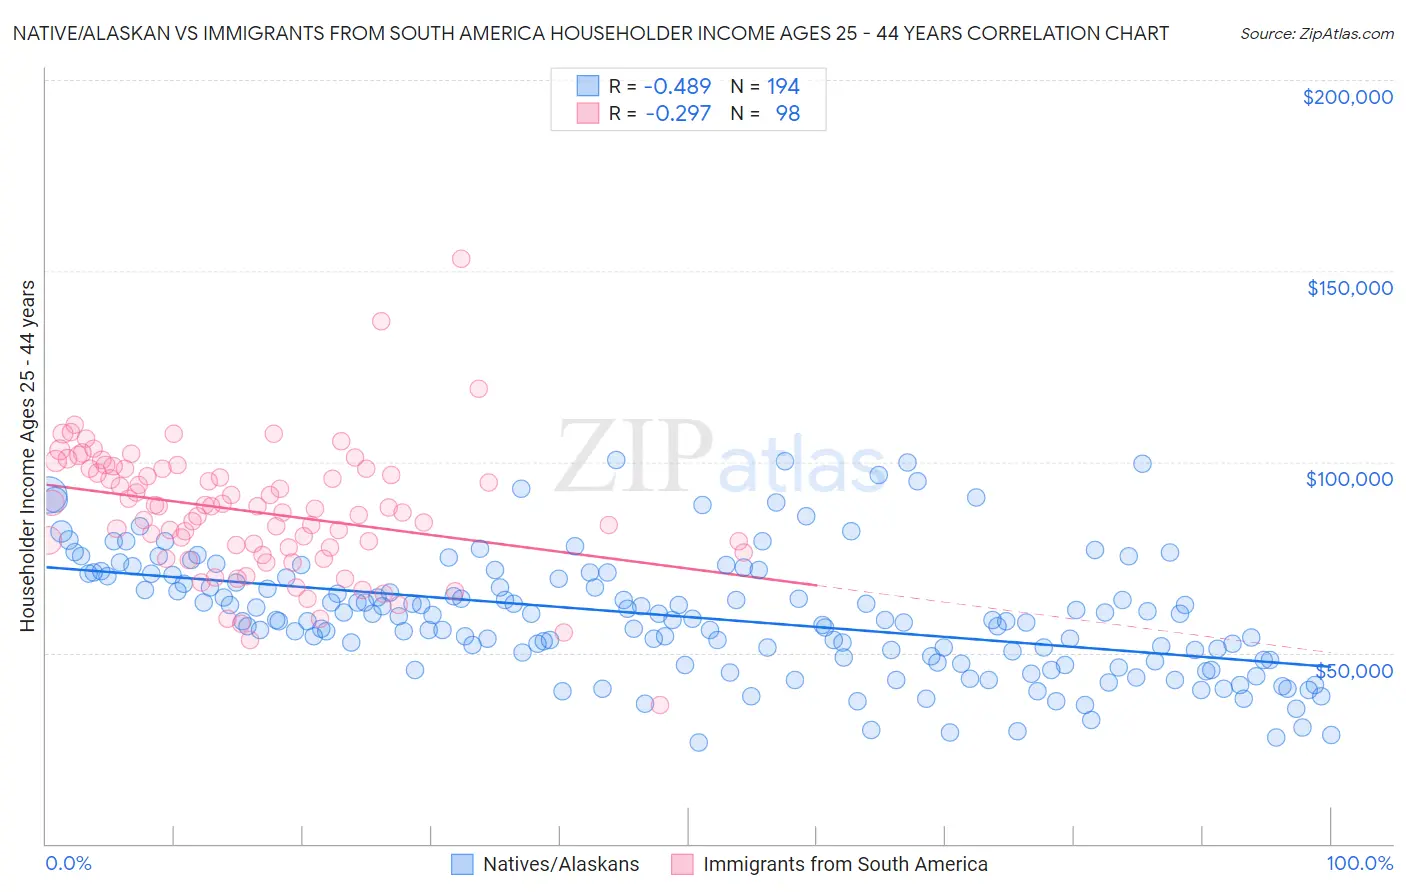 Native/Alaskan vs Immigrants from South America Householder Income Ages 25 - 44 years